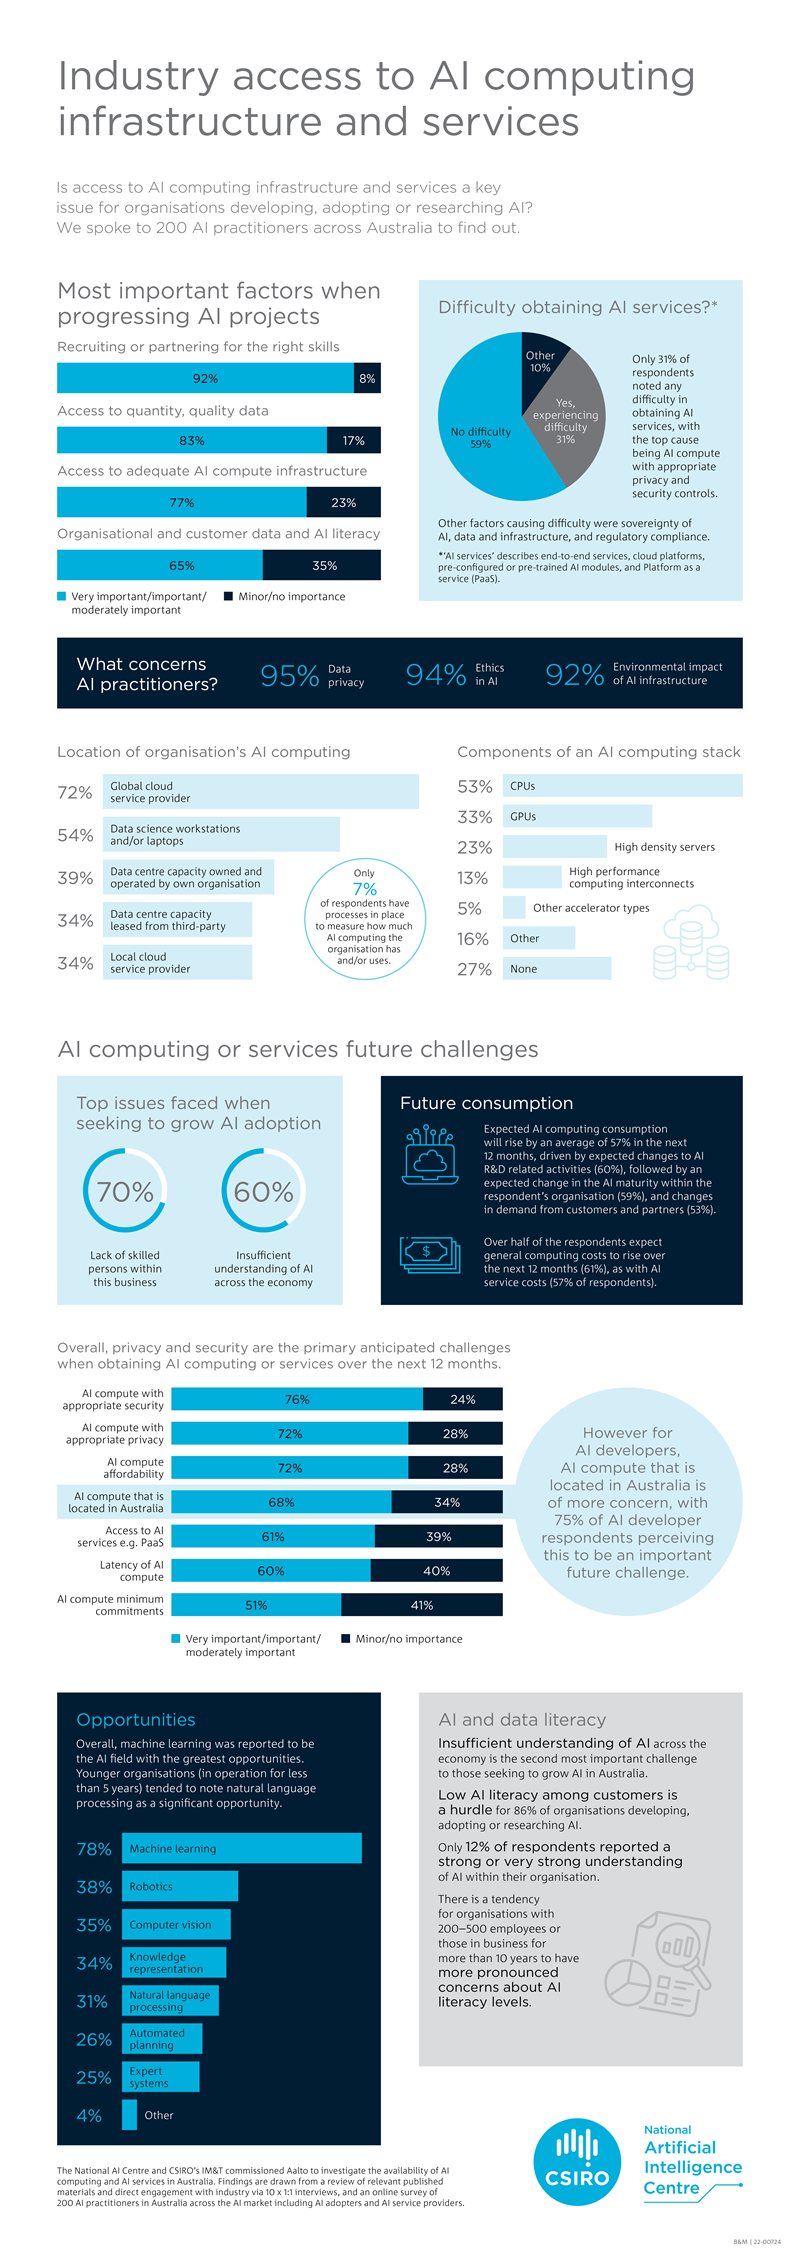 Industry access to AI computing infrastructure and services information graphic.